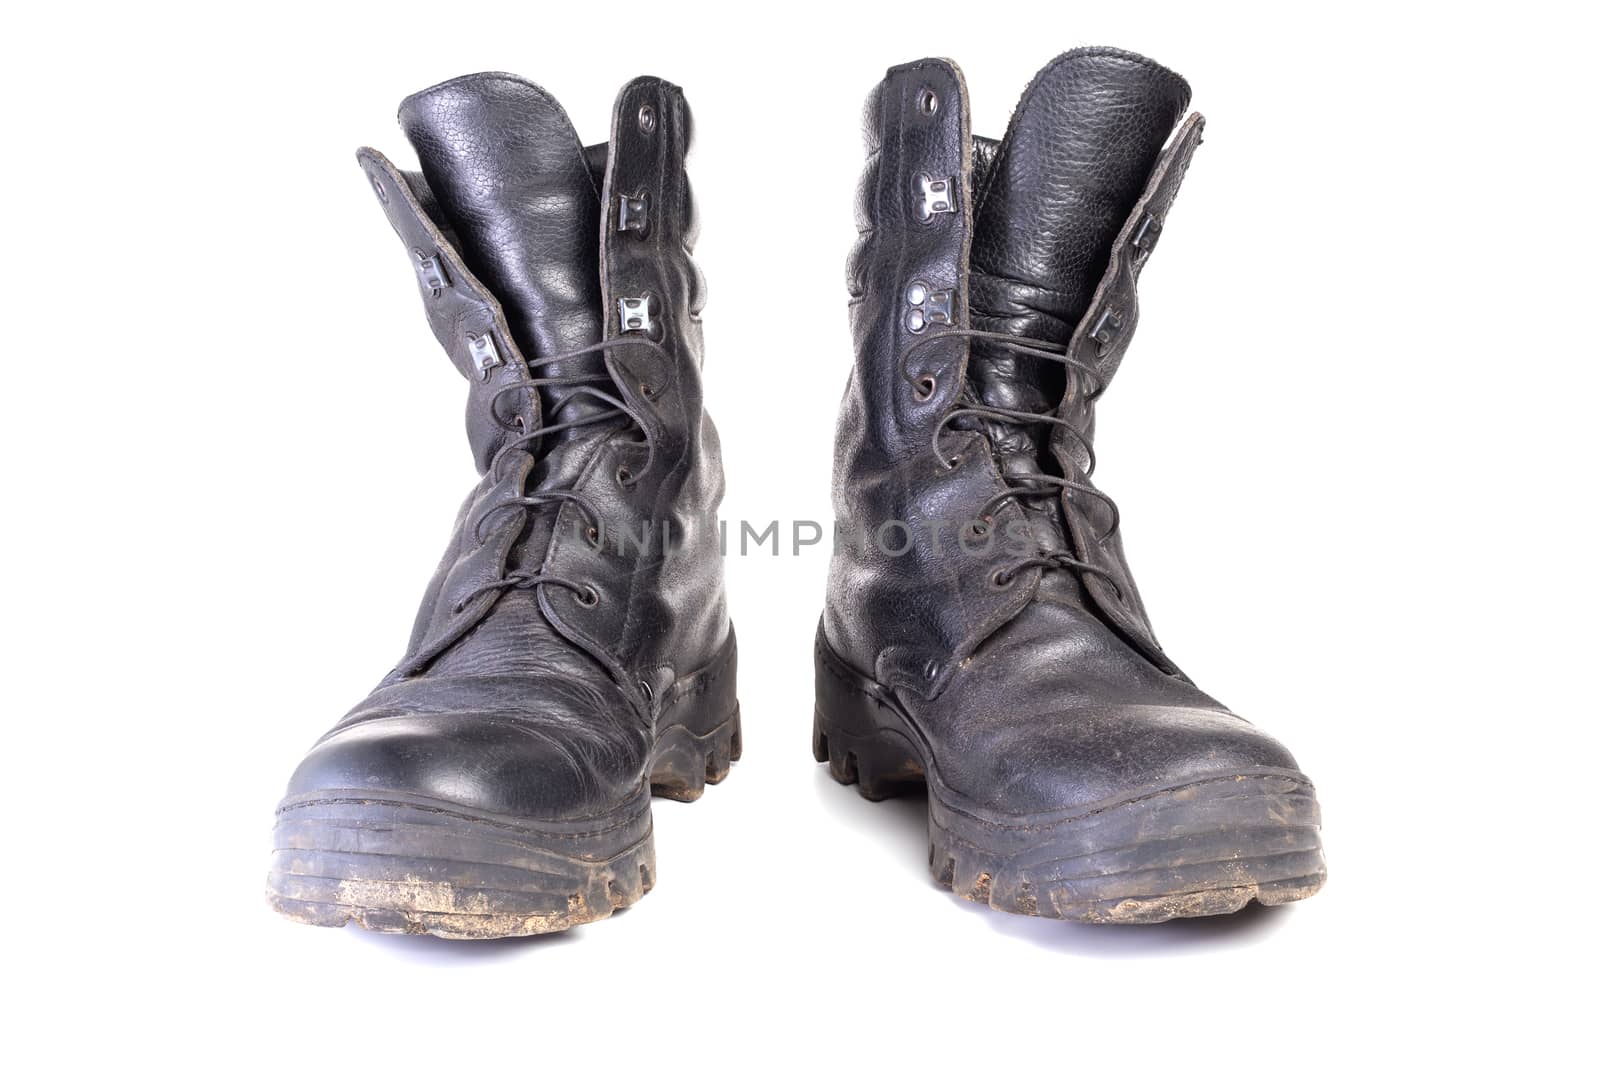 used dirty and dusty military black boots isolated on white back by z1b